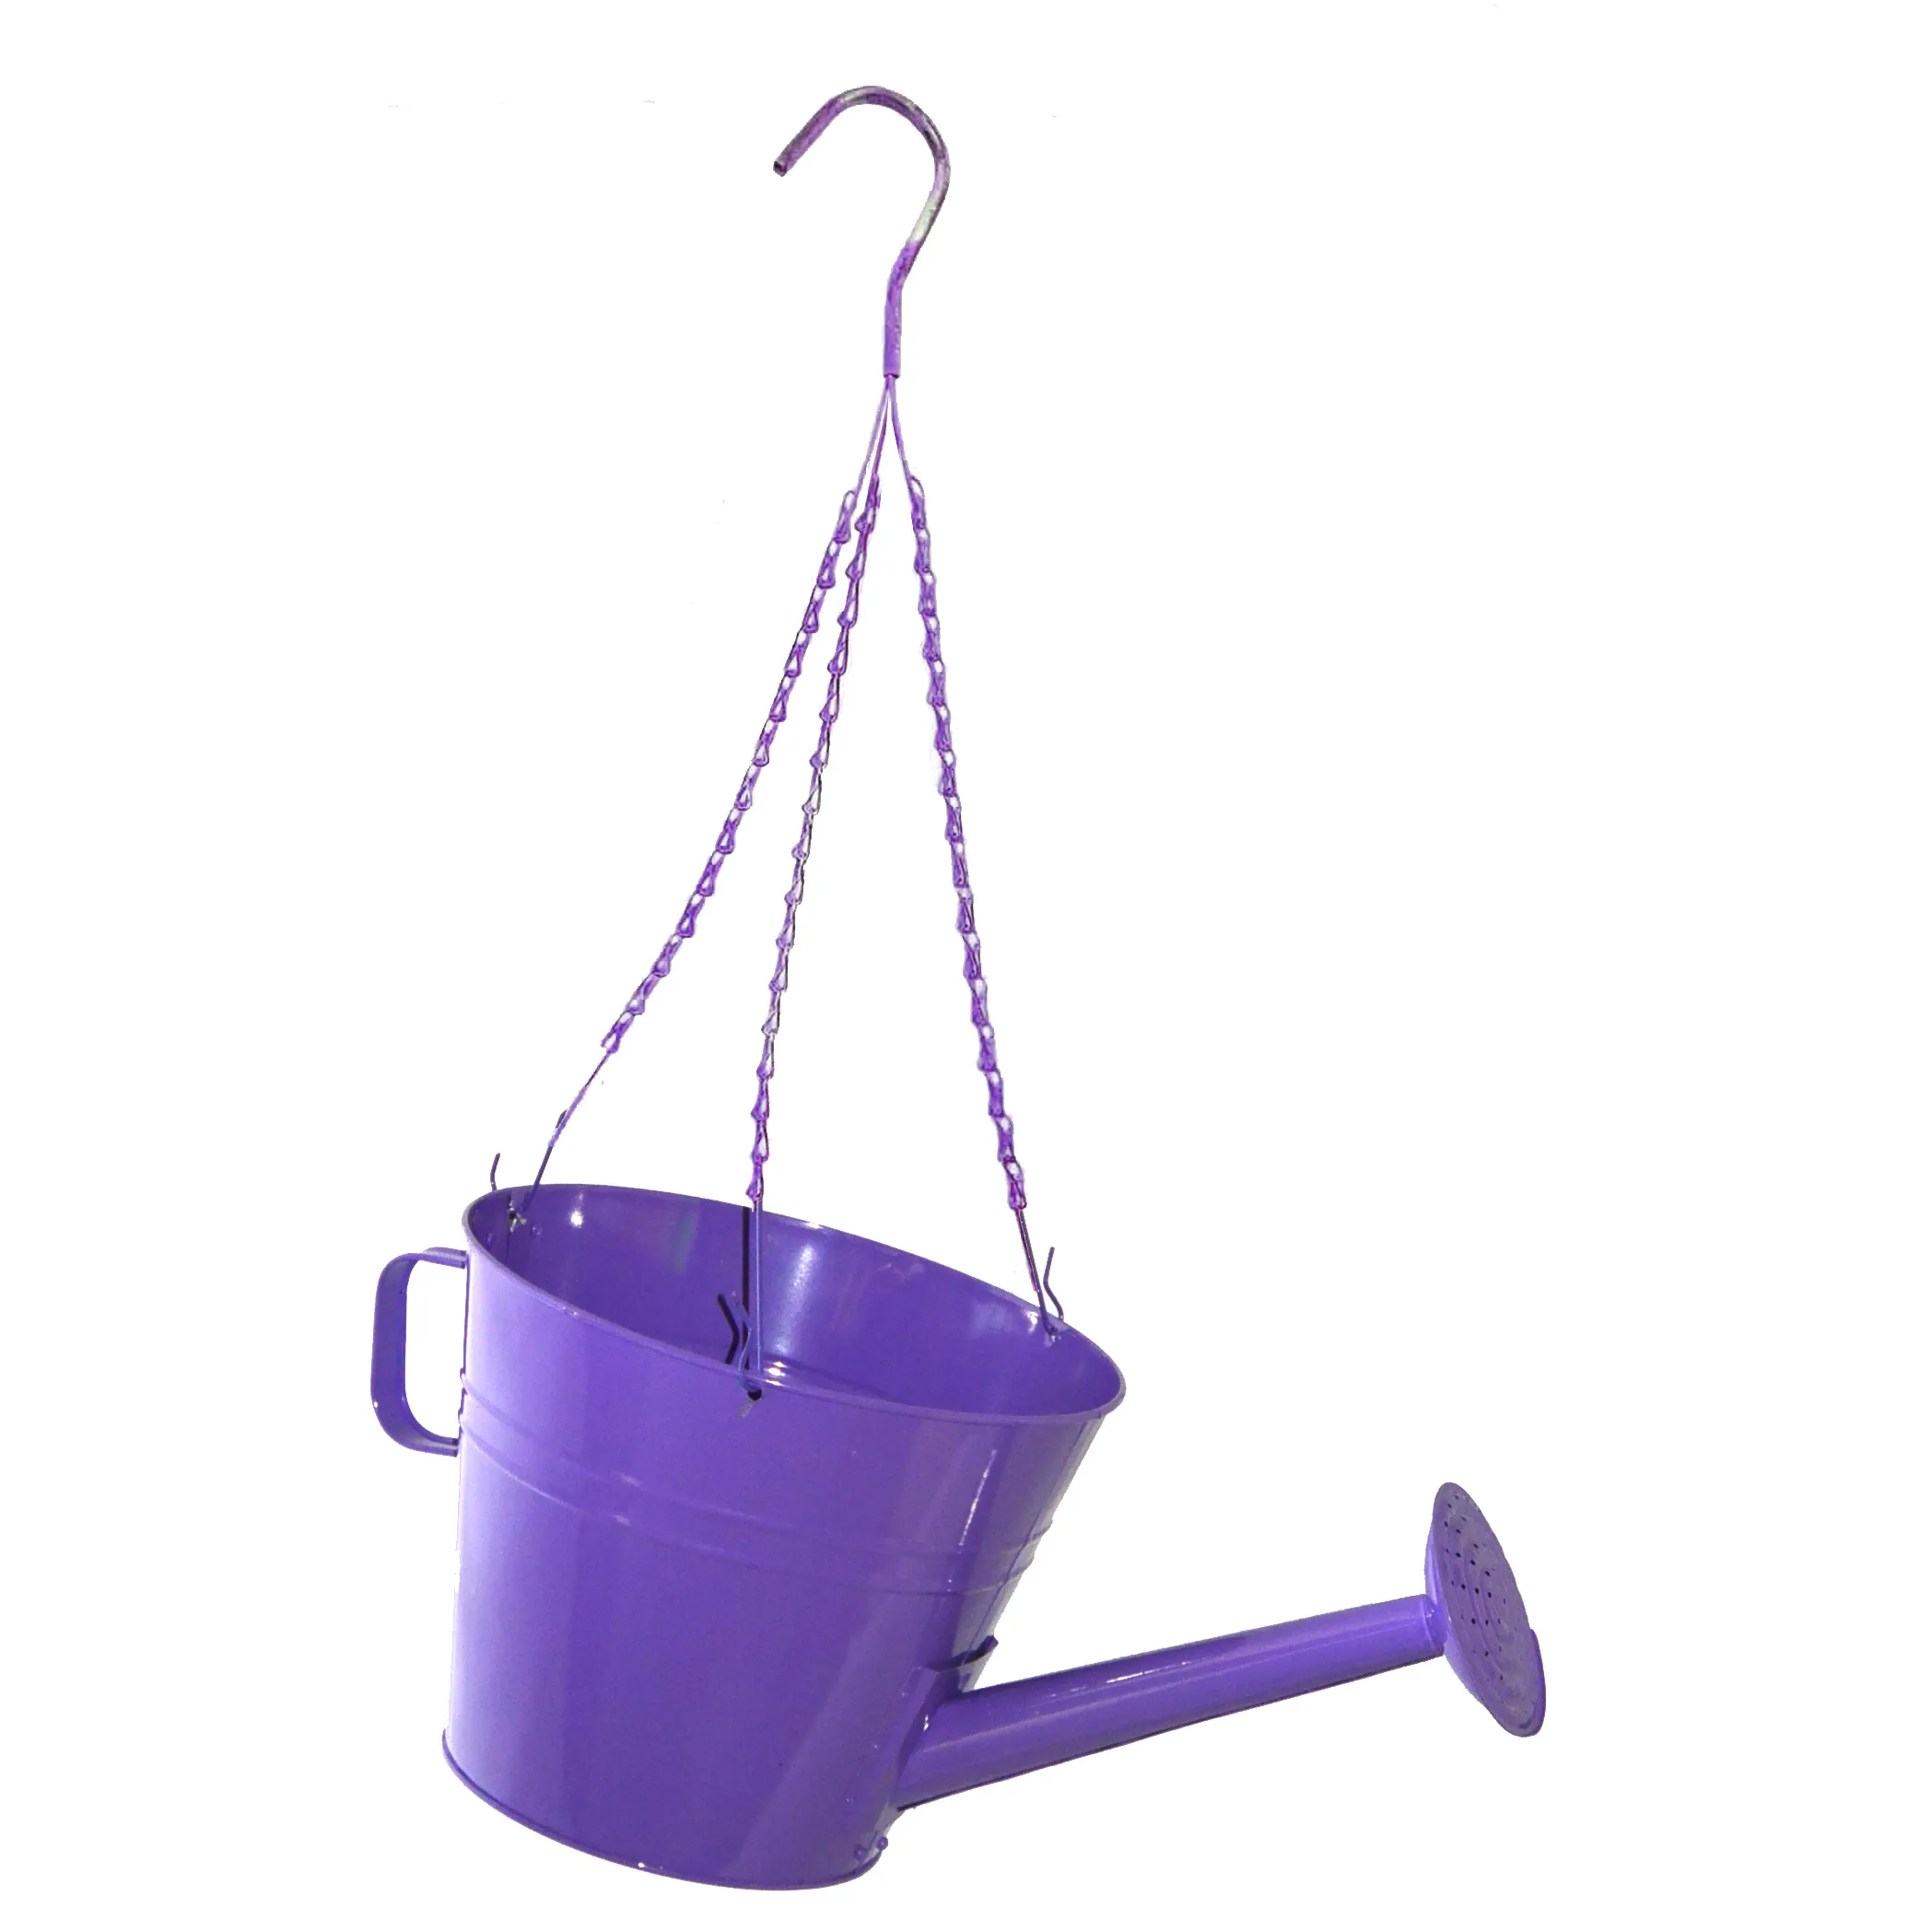 Hanging Water Can Planter 10 Inch Key West - 12 per case